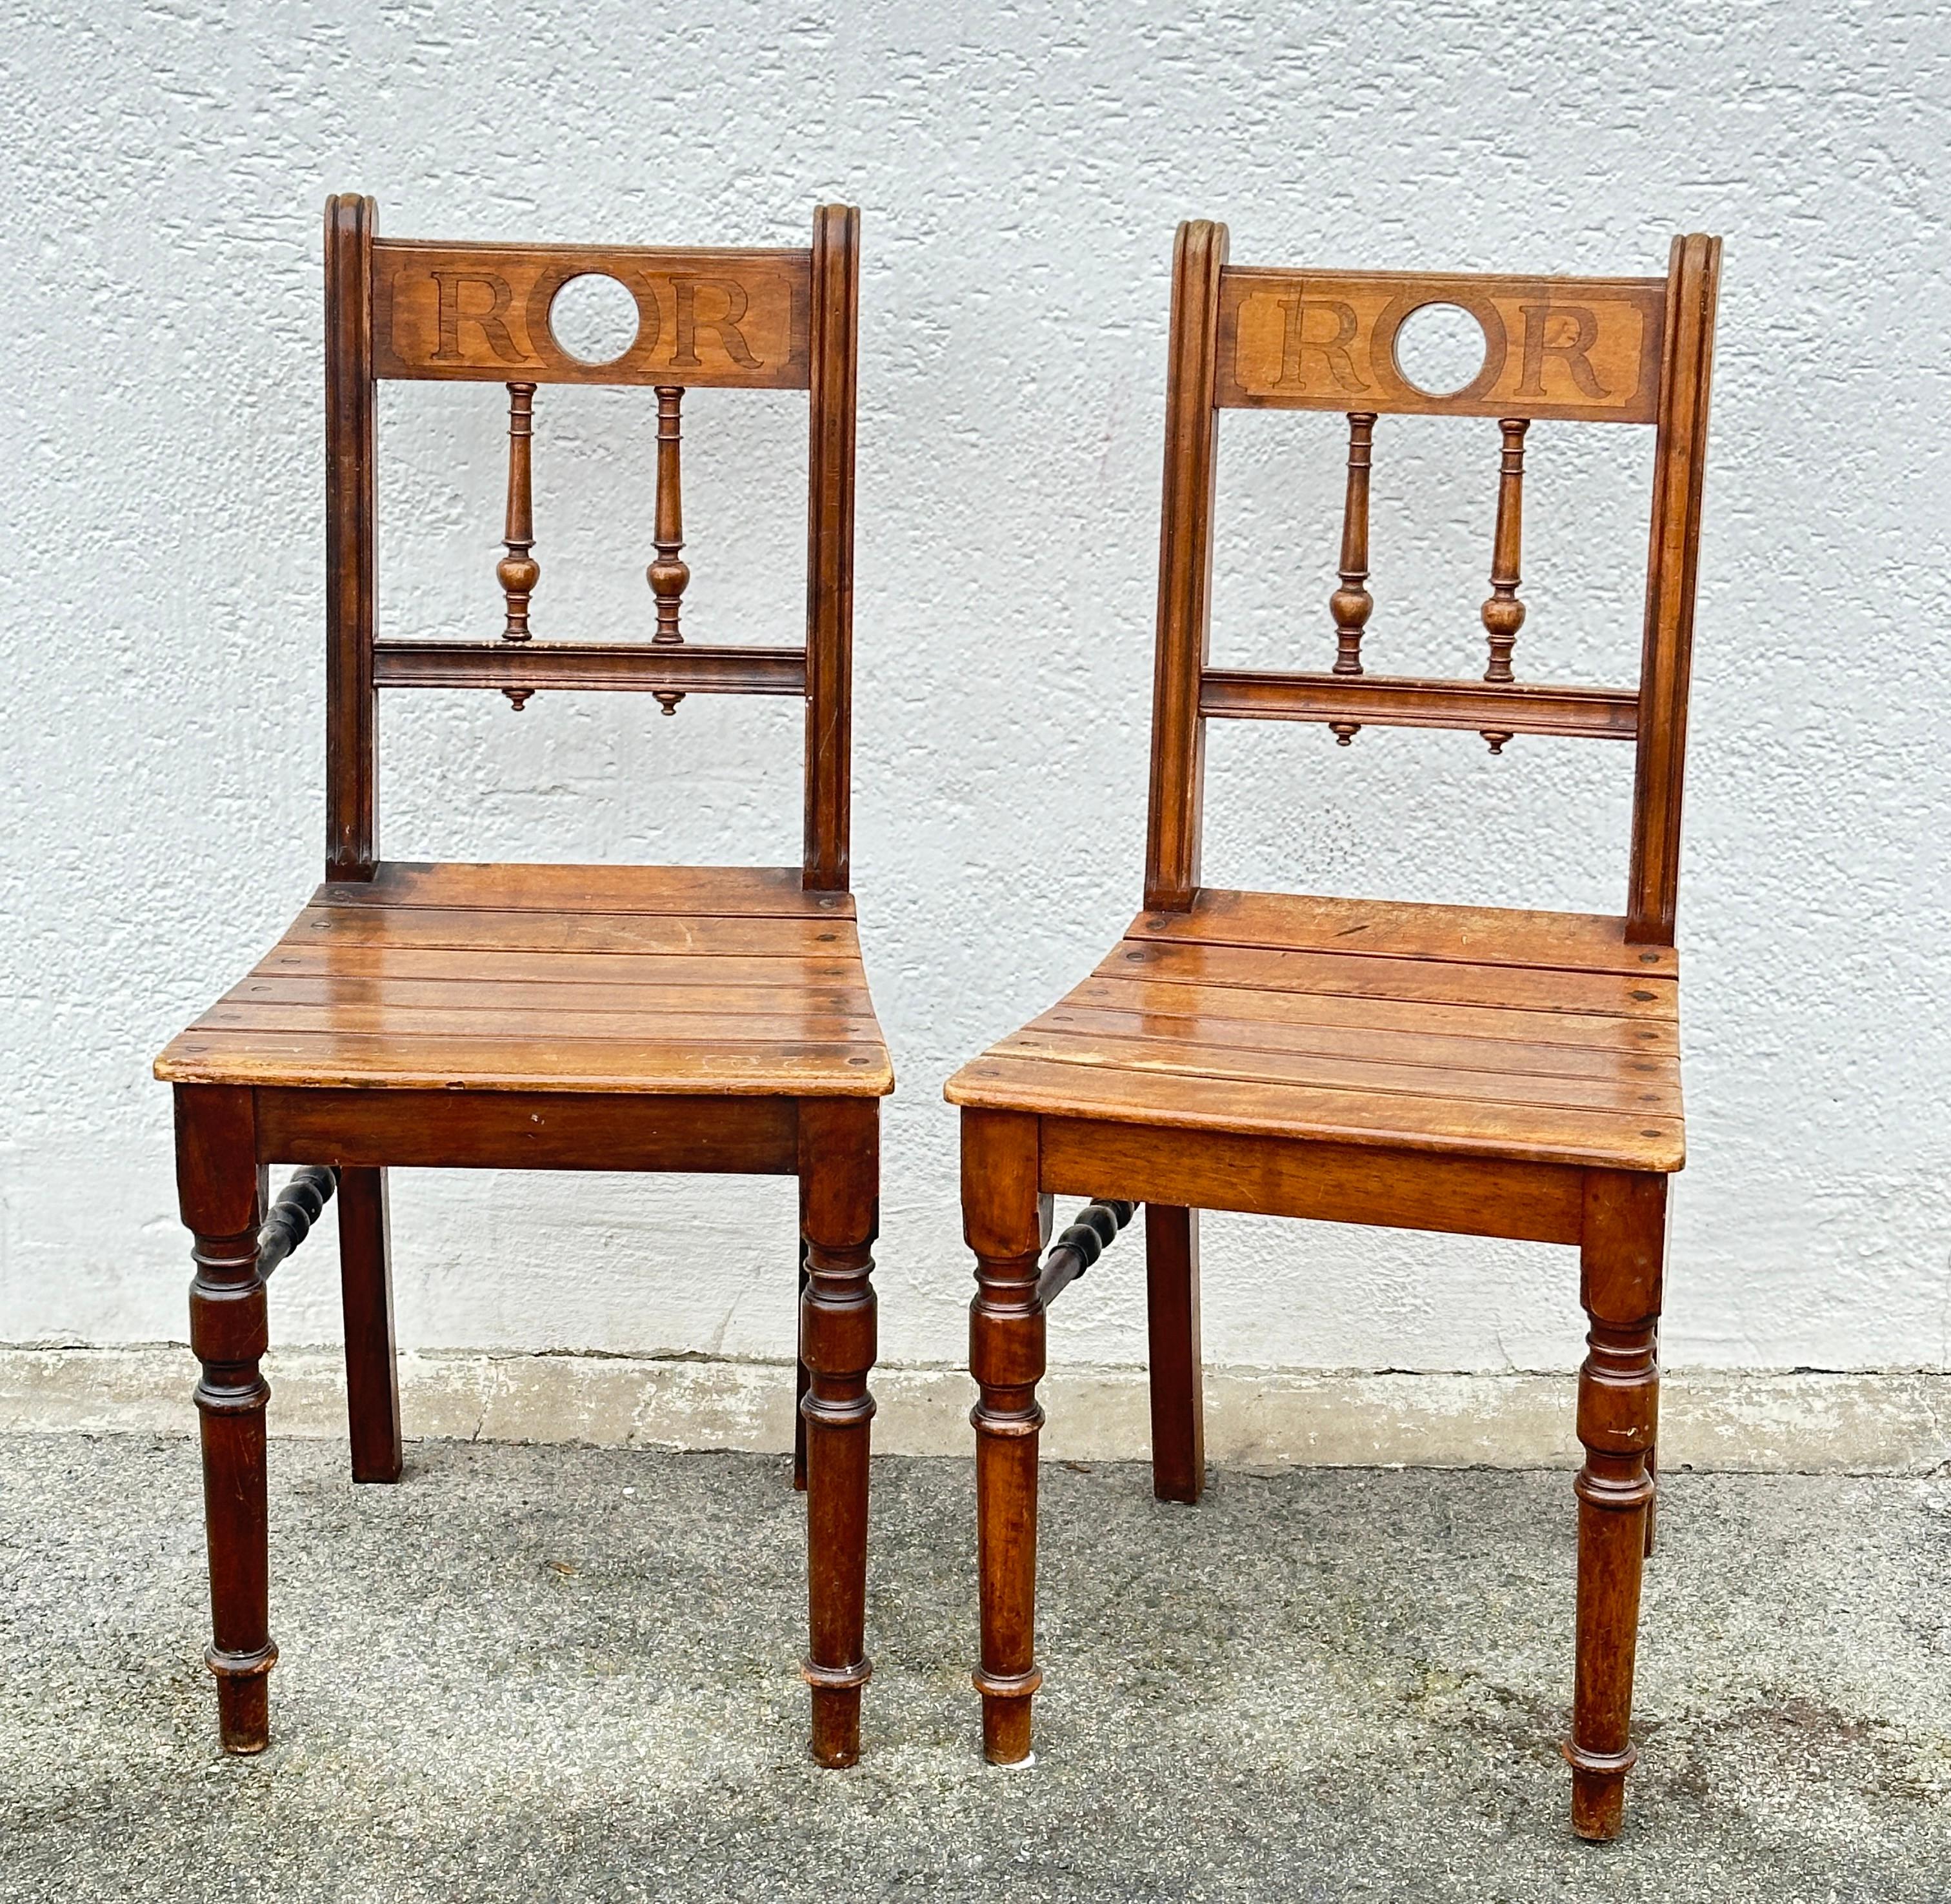 Set of Ten wooden Dinning Chairs out of Ratibor Castle City of Roth, Germany For Sale 8